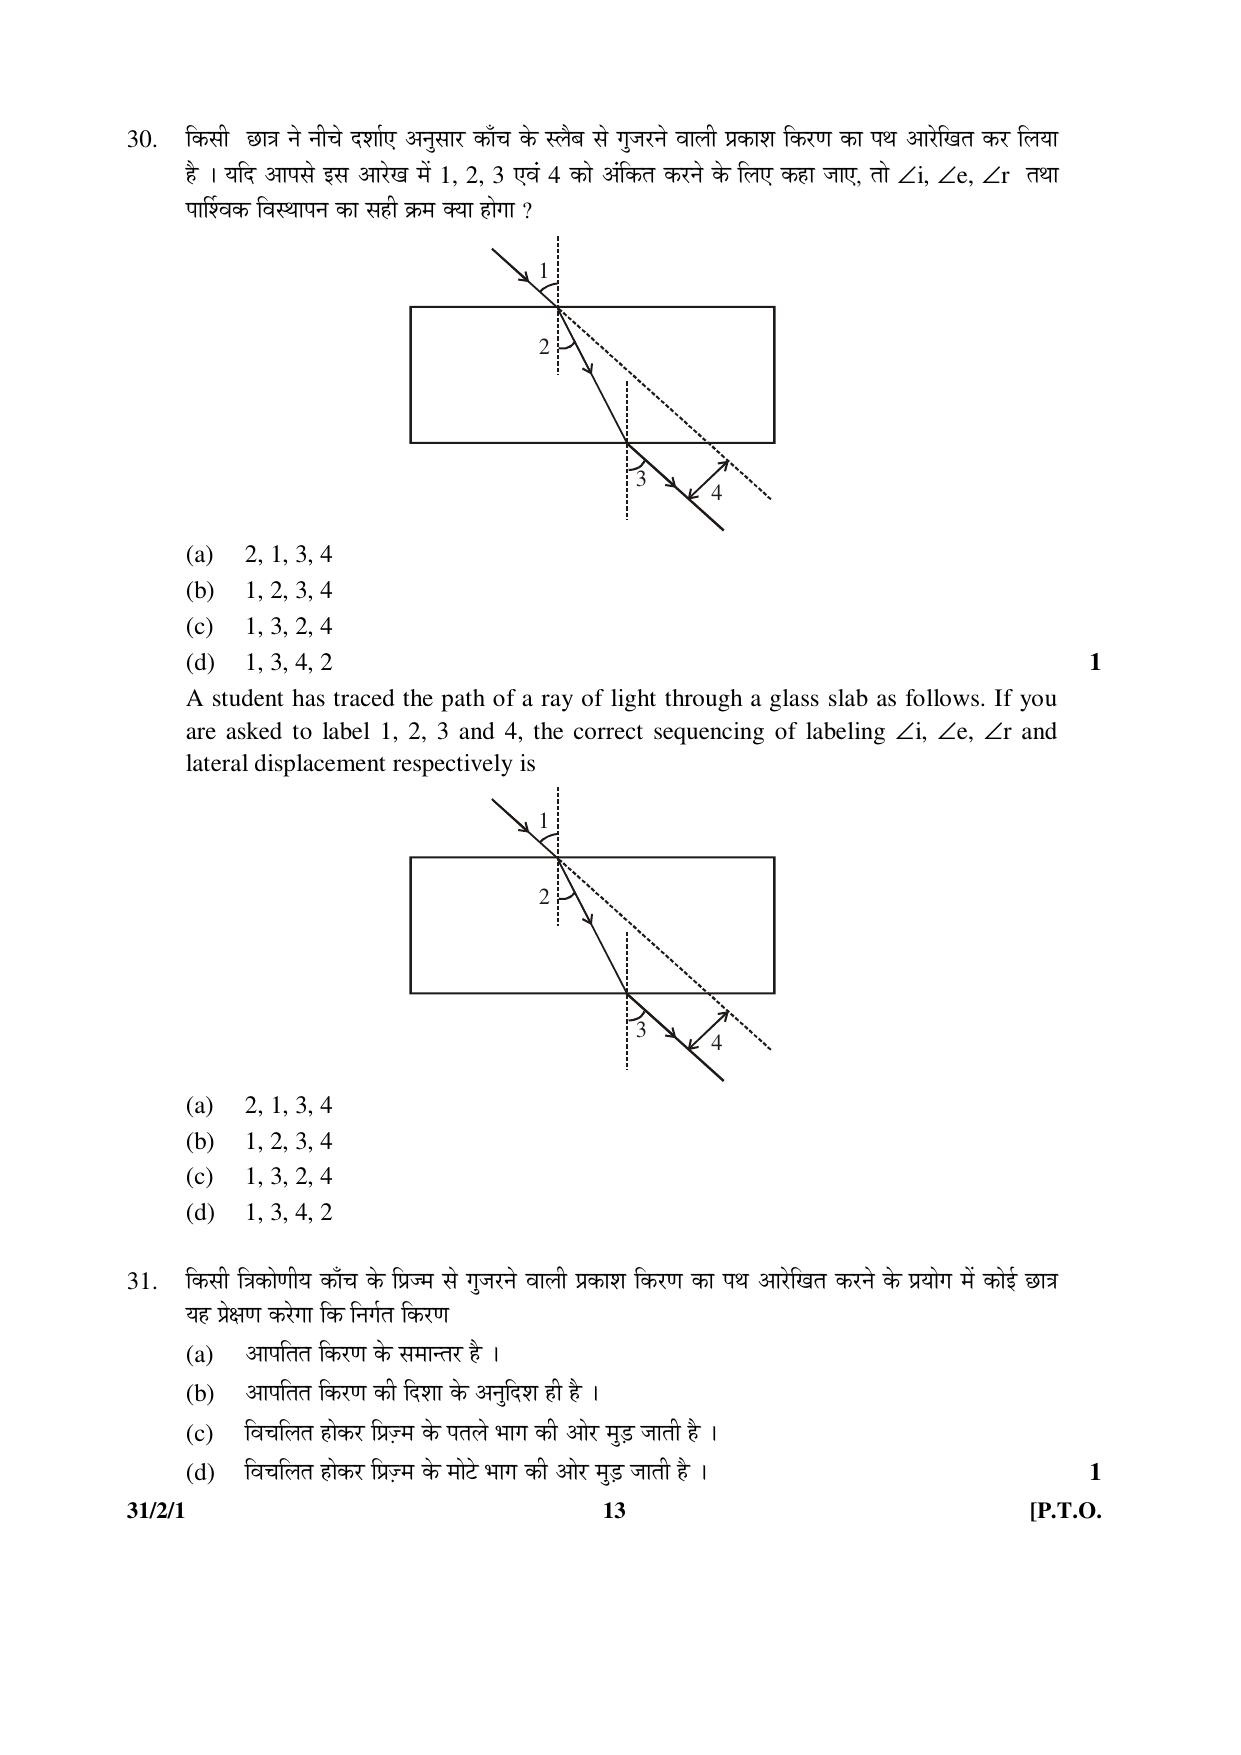 CBSE Class 10 31-2-1 _Science 2016 Question Paper - Page 13